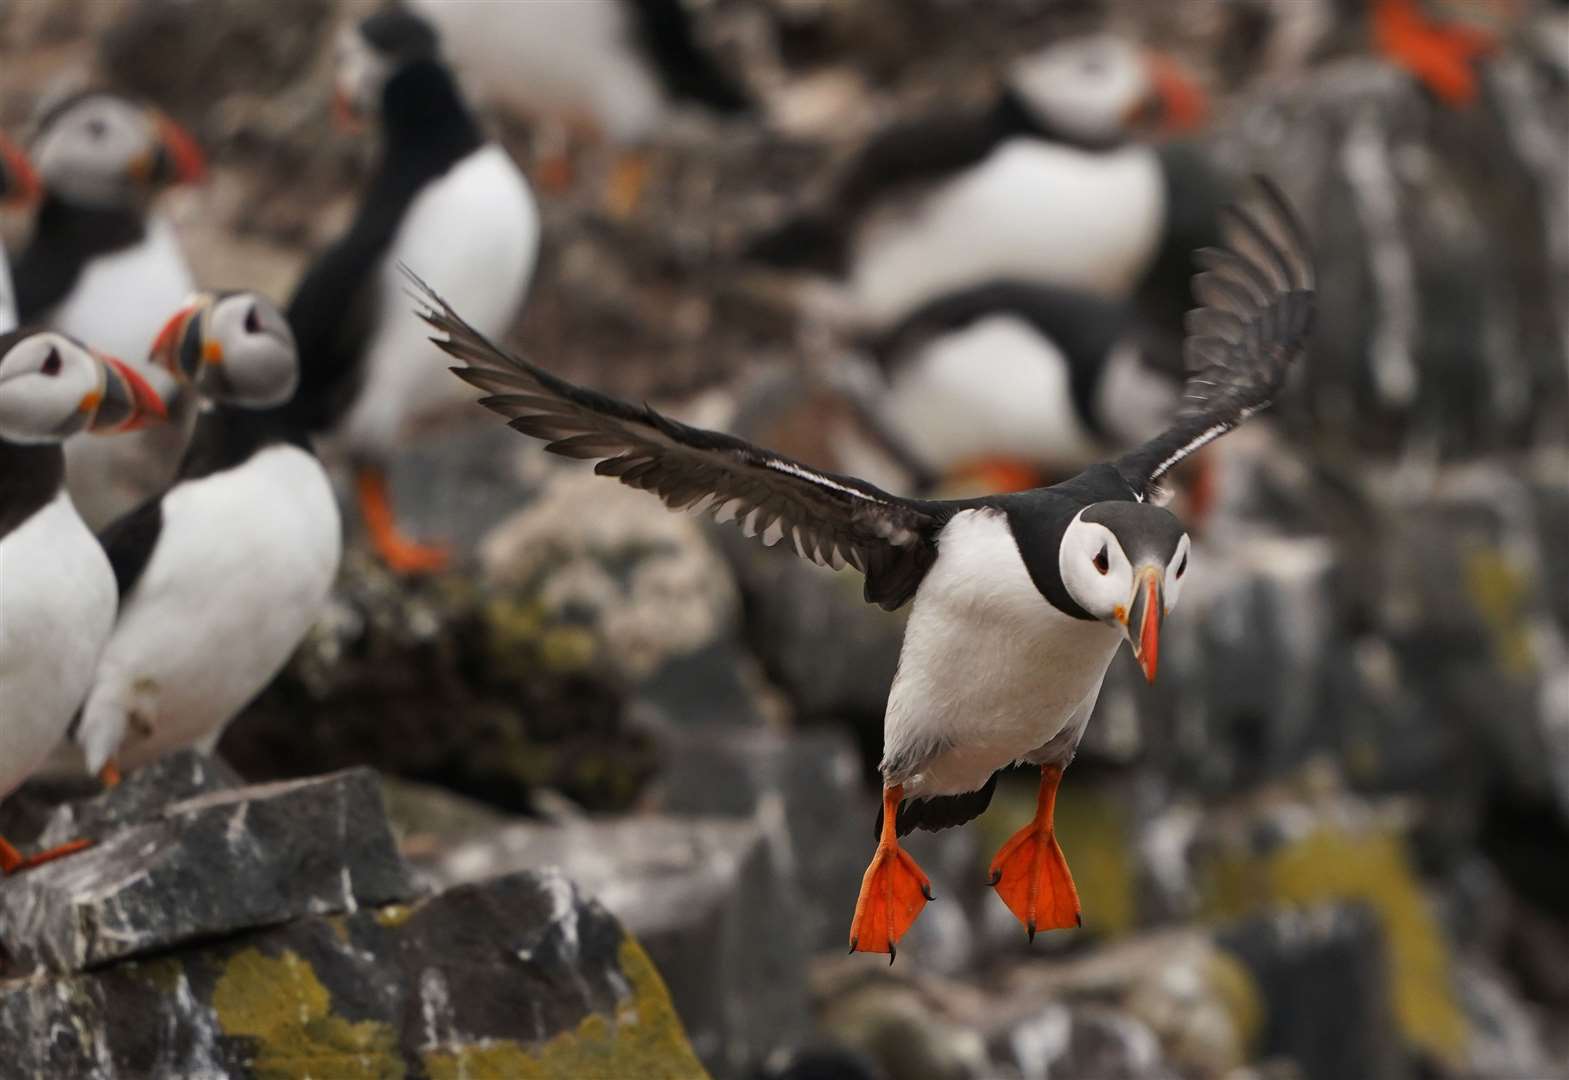 National Trust staff undertook the annual puffin census on the Farne Islands in Northumberland (Owen Humphreys/PA)